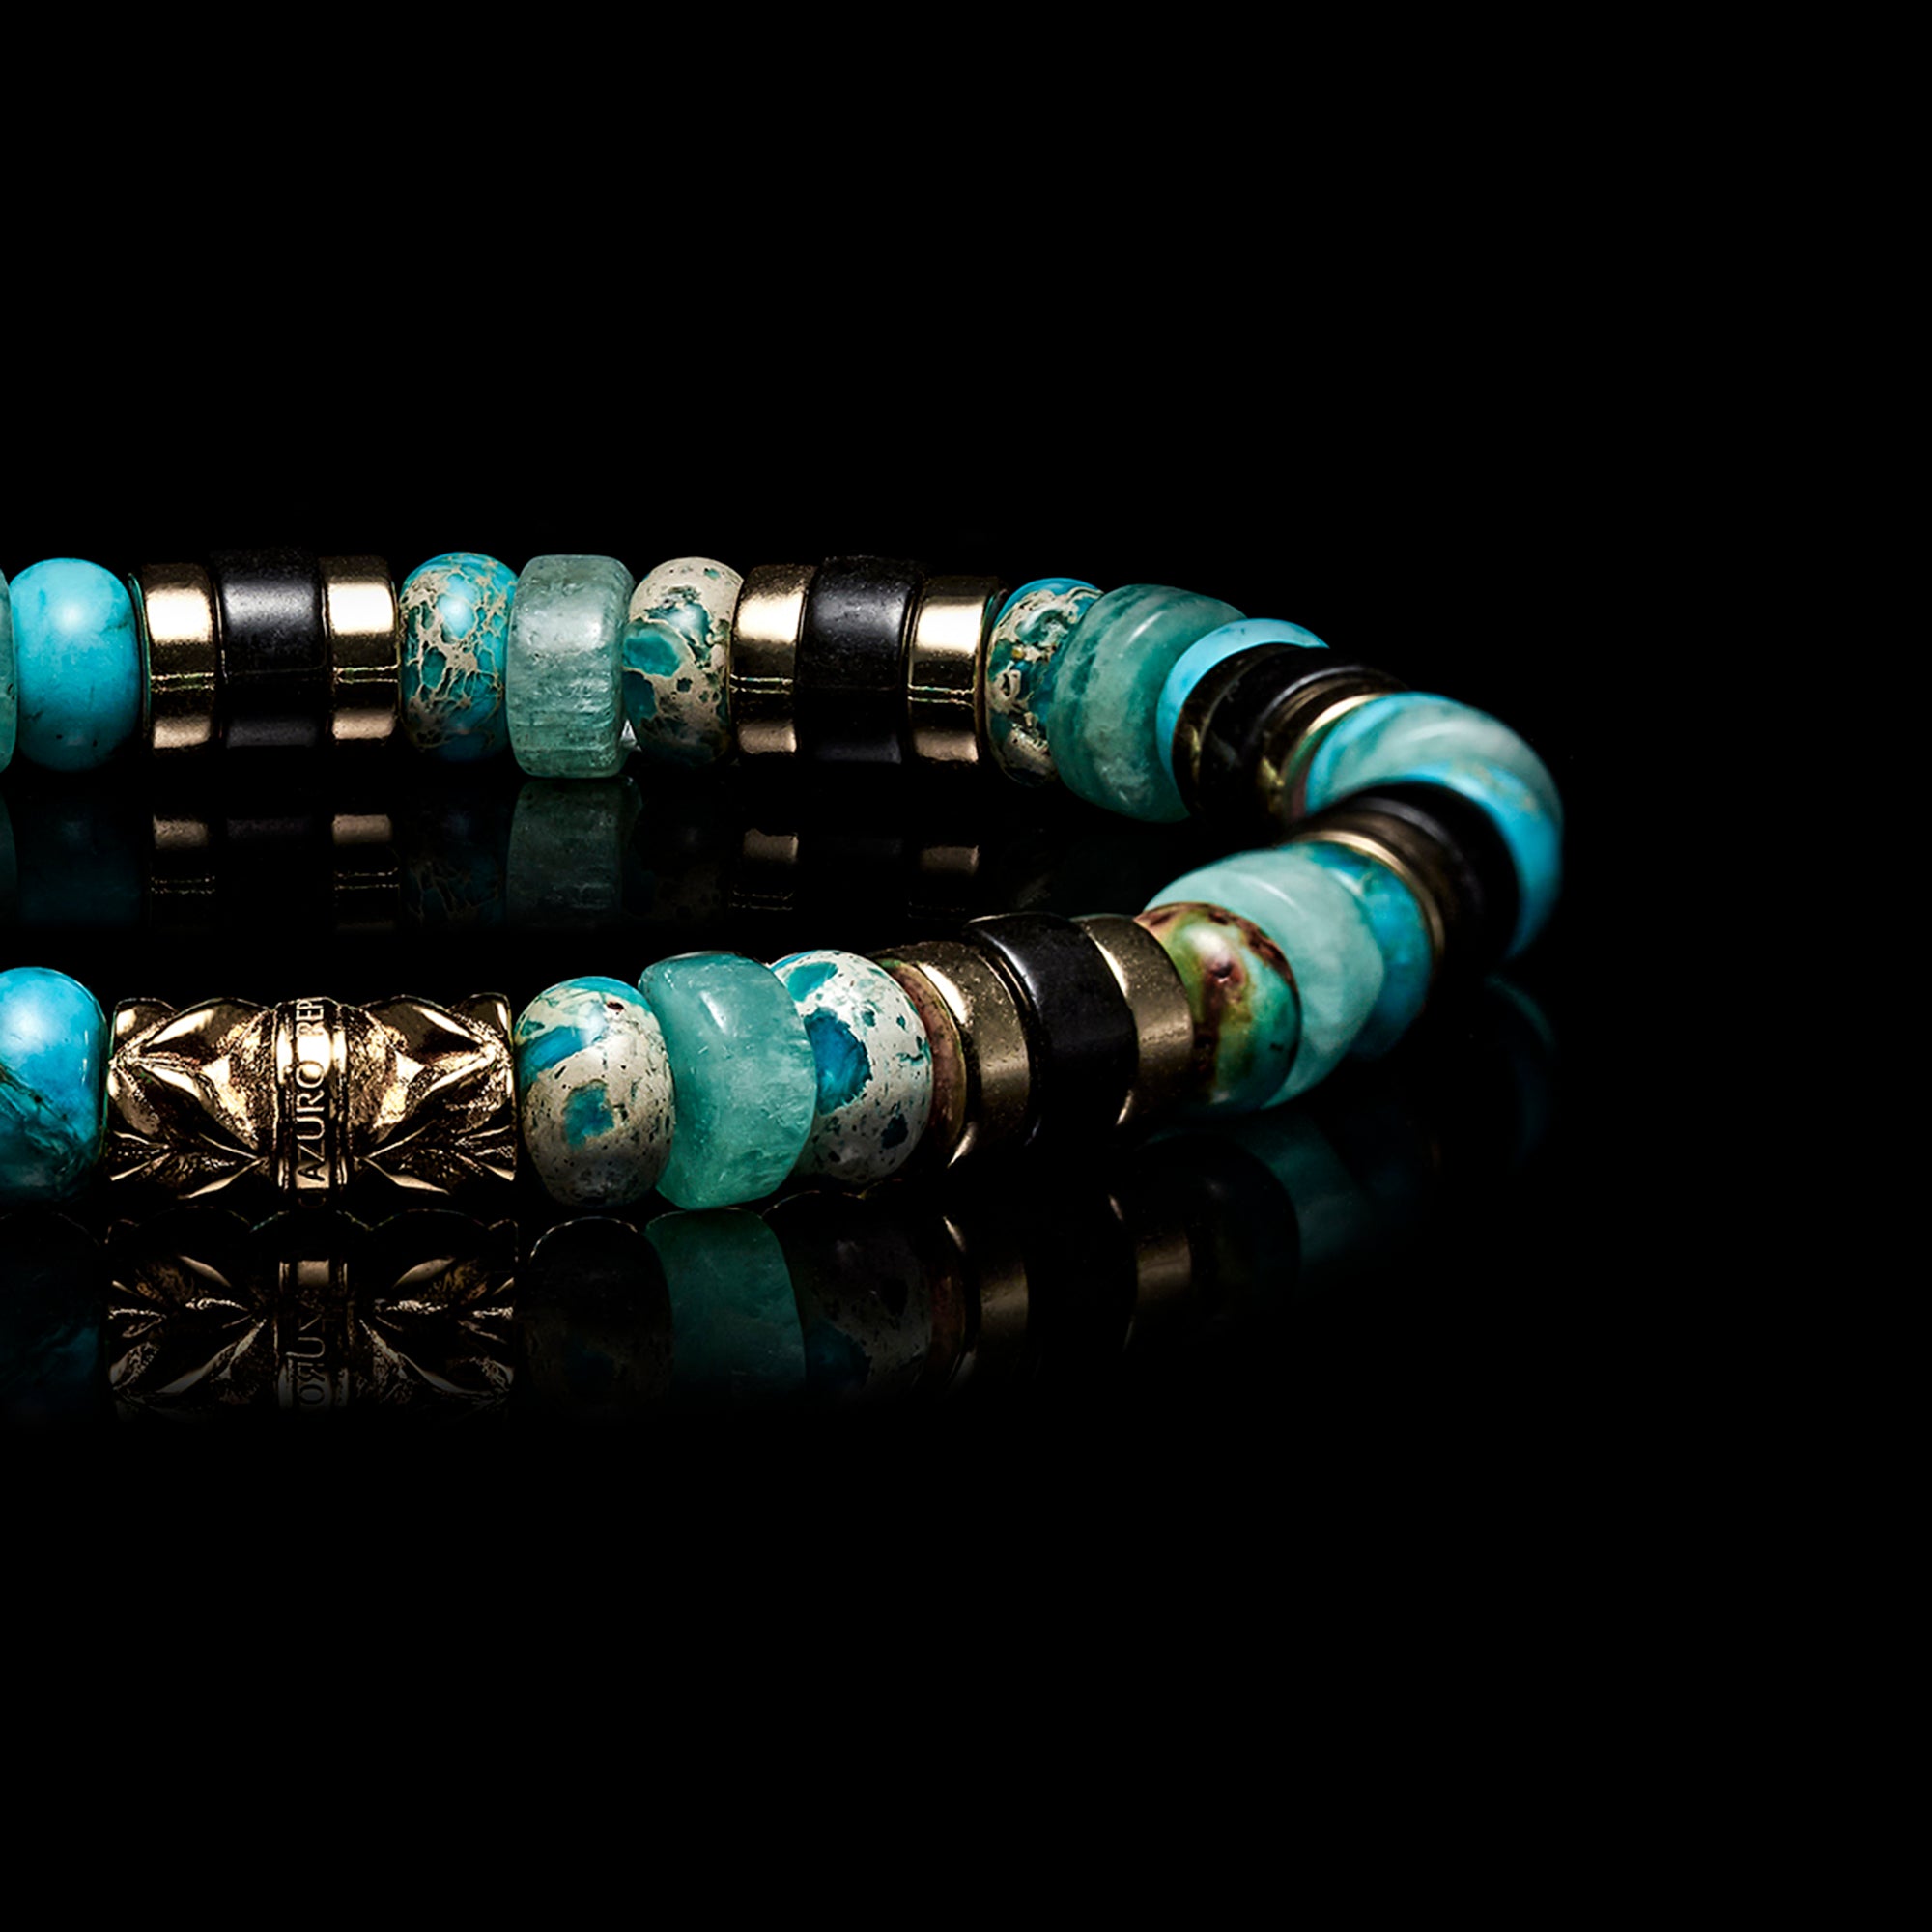 Bora bora Bracelet with crystal and swarovski beads in Turquoise and Blue –  Shop